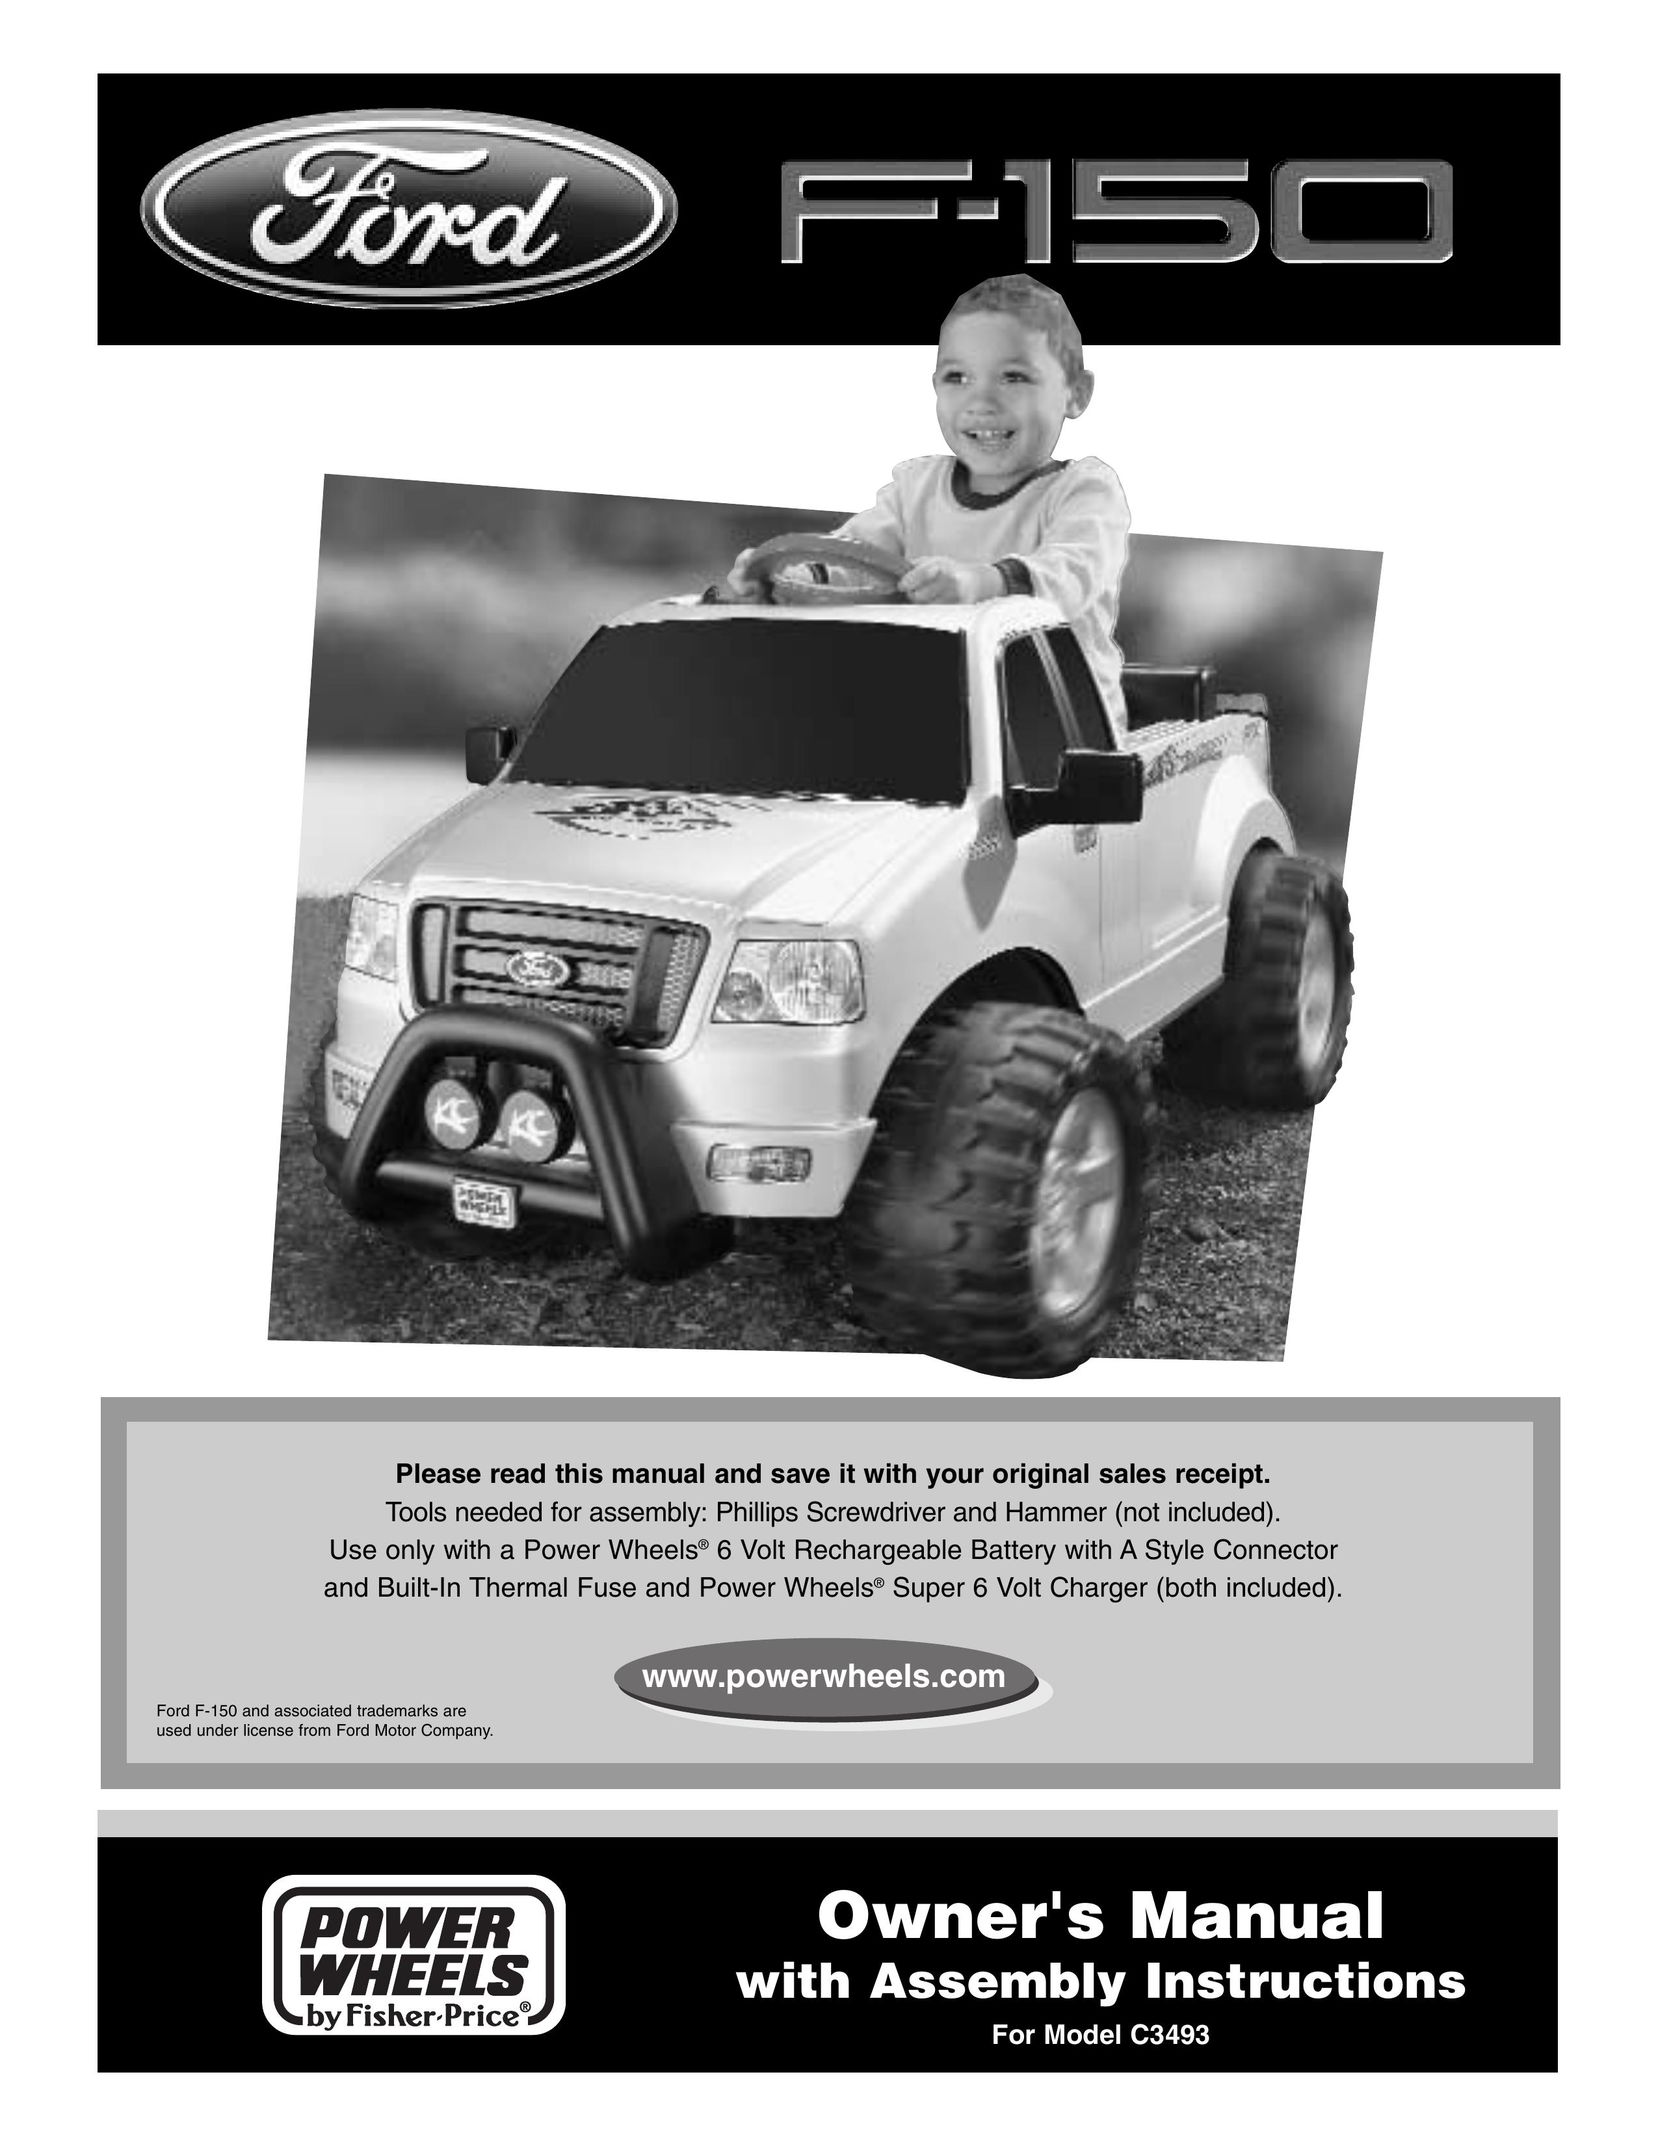 Ford C3493 Riding Toy User Manual